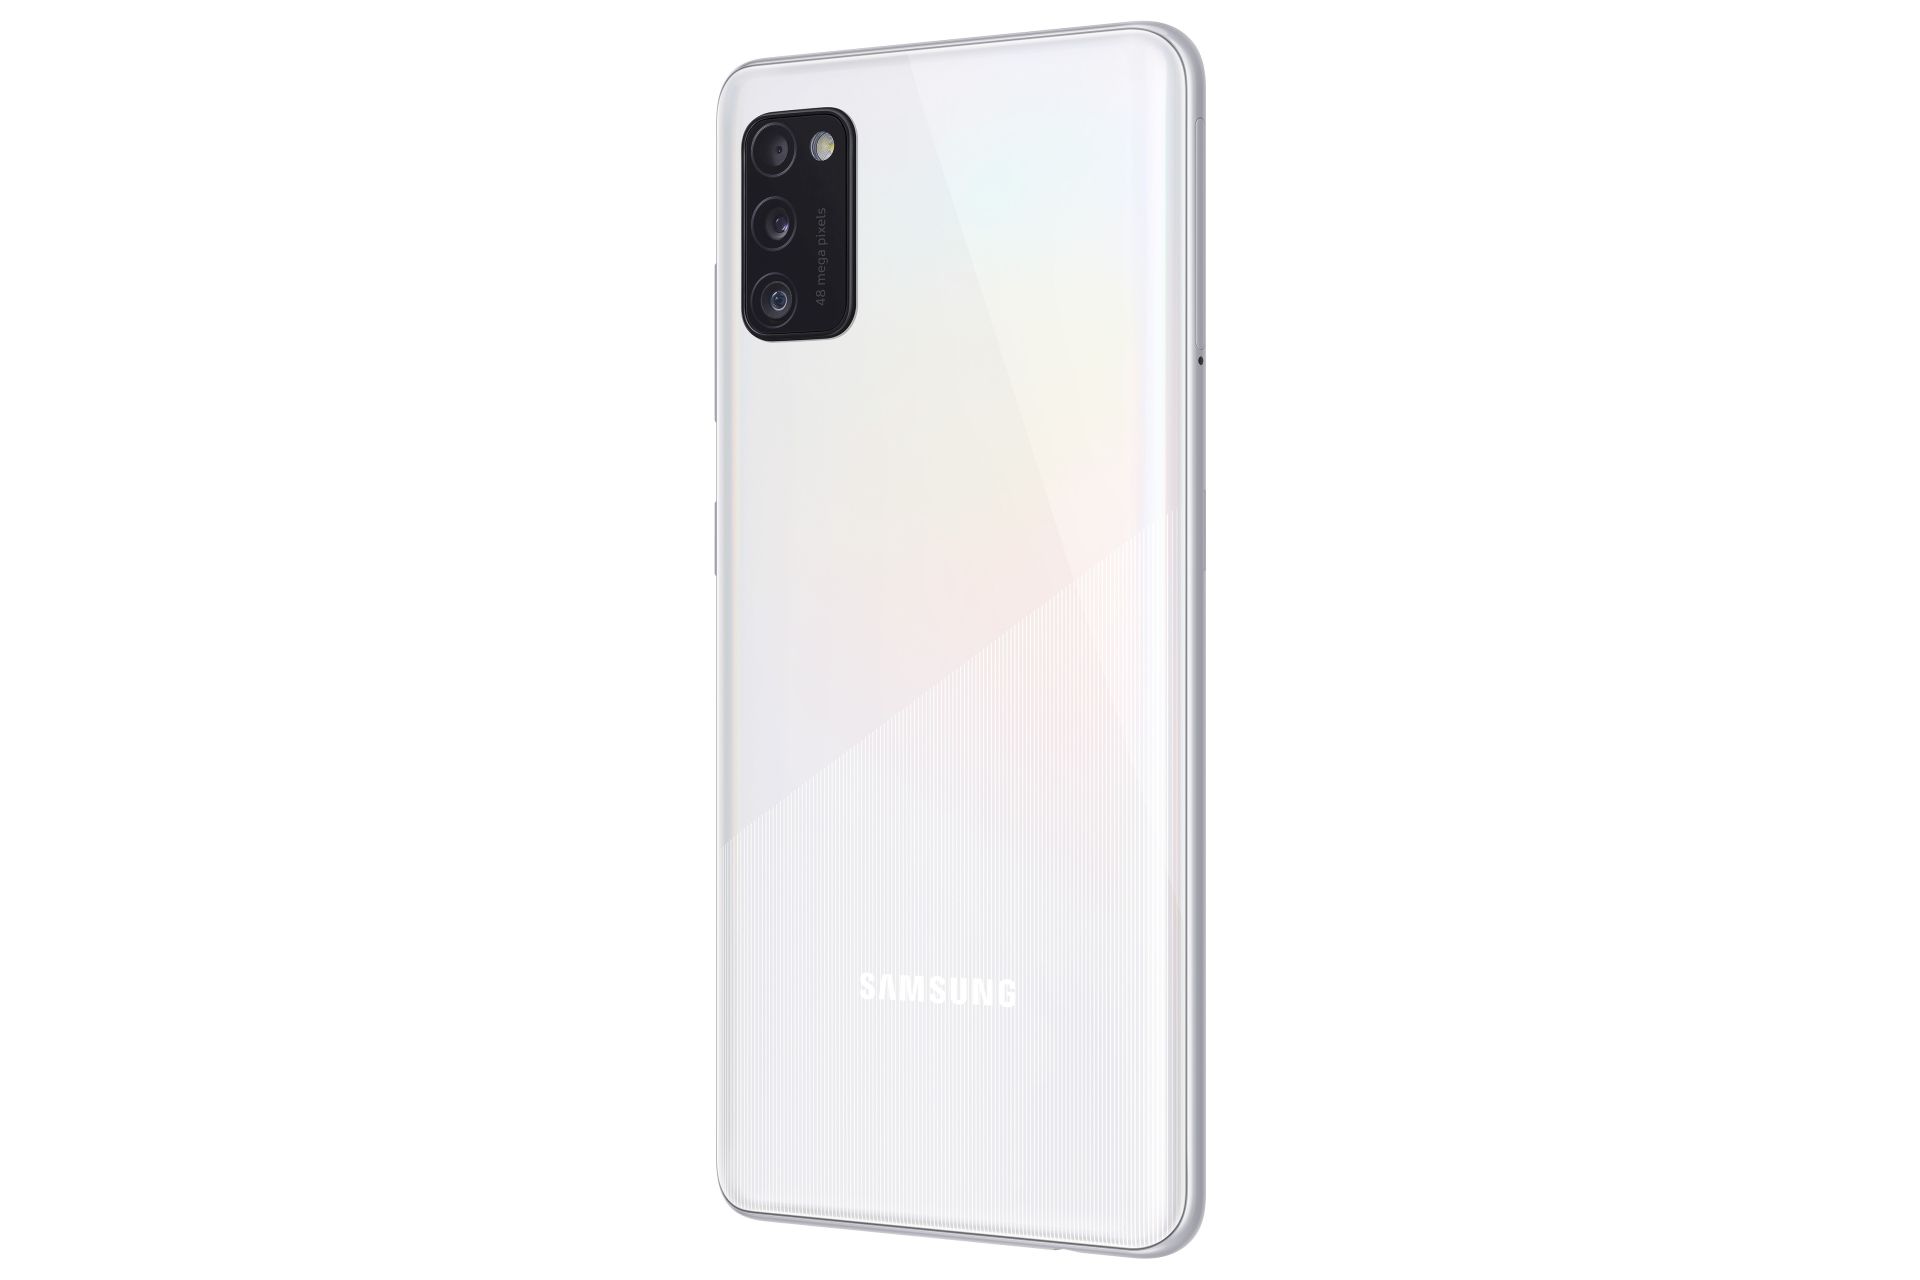 International Galaxy A41 is official